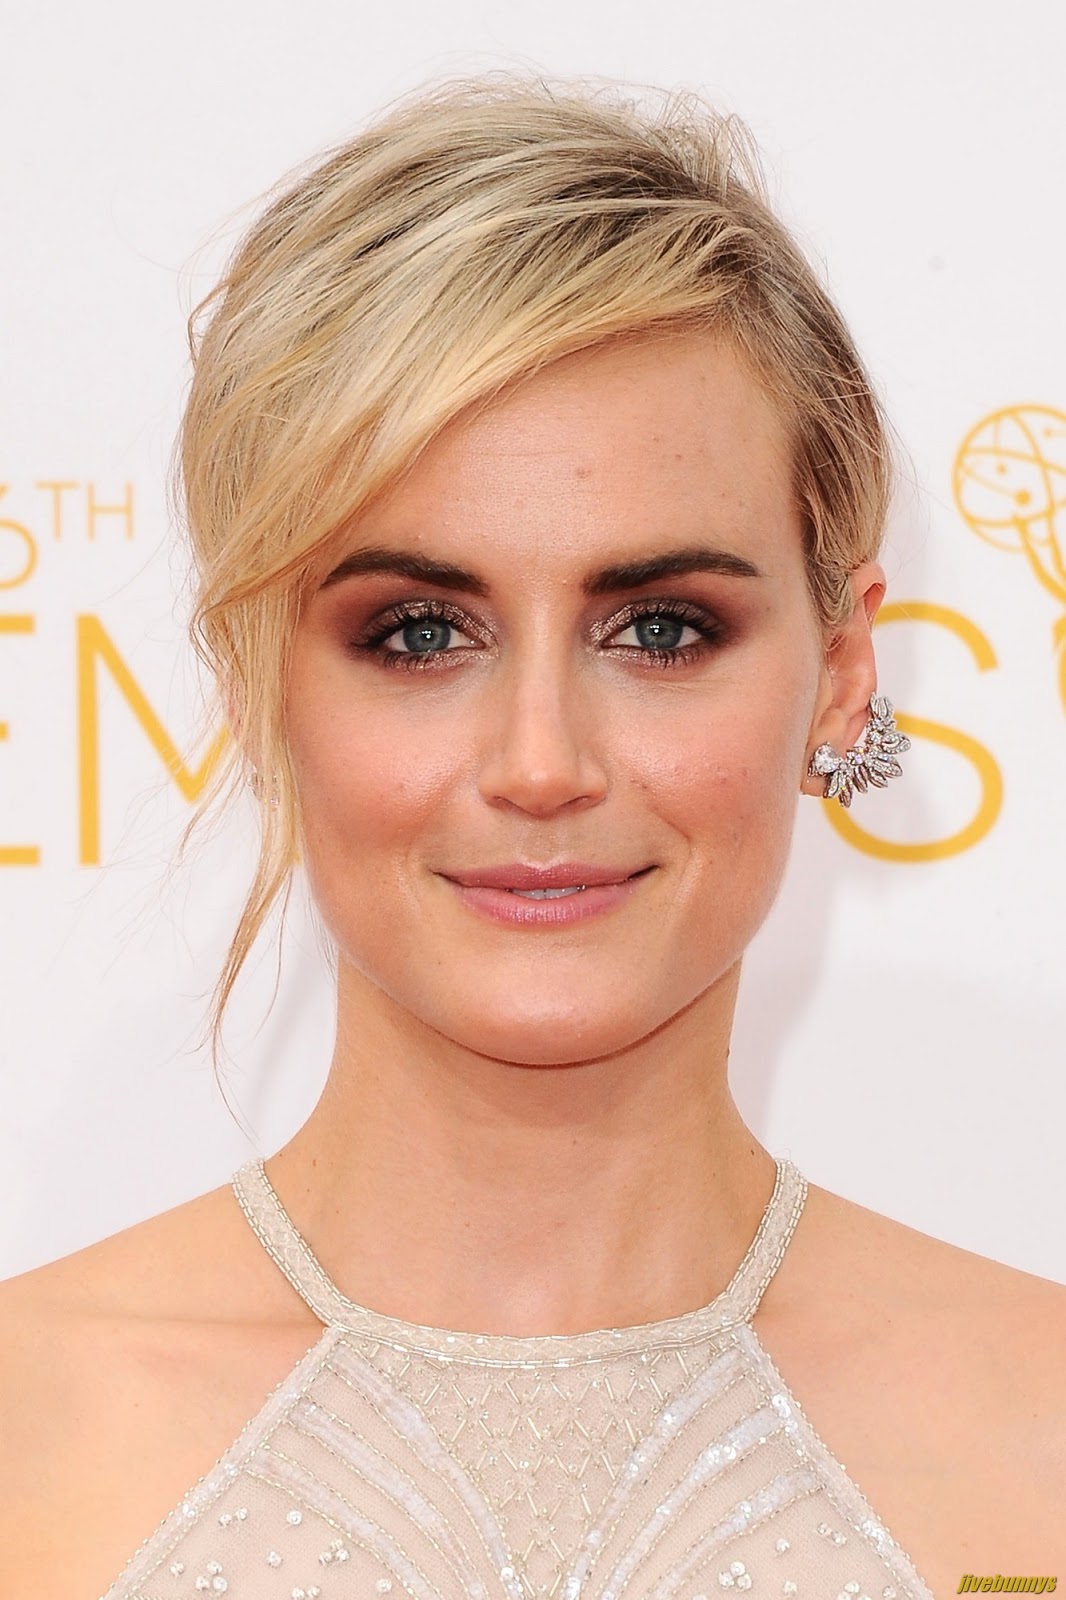 View image Taylor Schilling Celebrity Photos Gallery 1. Taylor Schilling Ce...